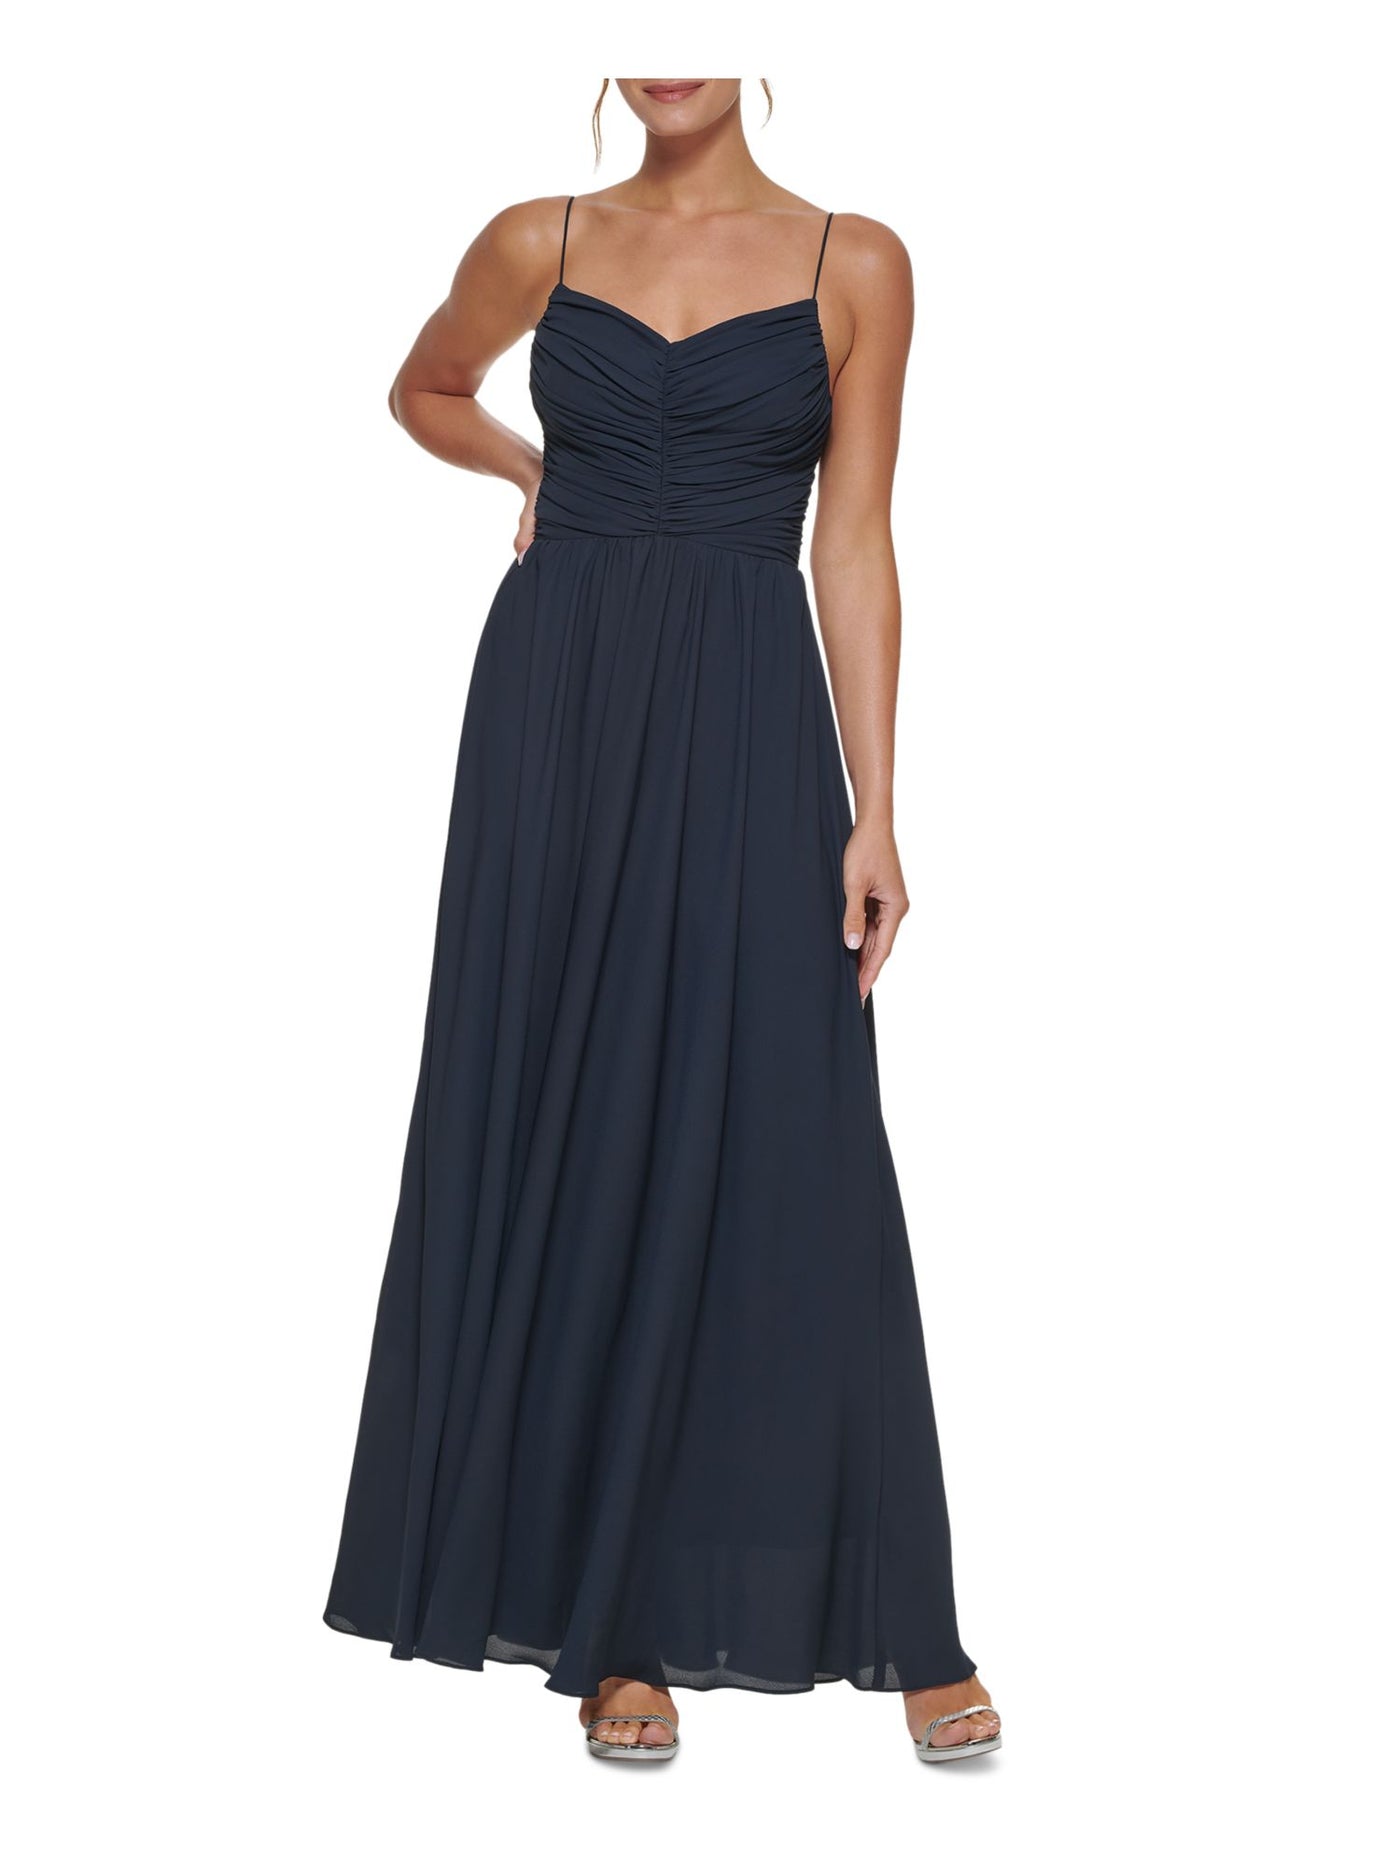 DKNY Womens Navy Ruched Zippered Lined Spaghetti Strap V Neck Full-Length Formal Gown Dress 12